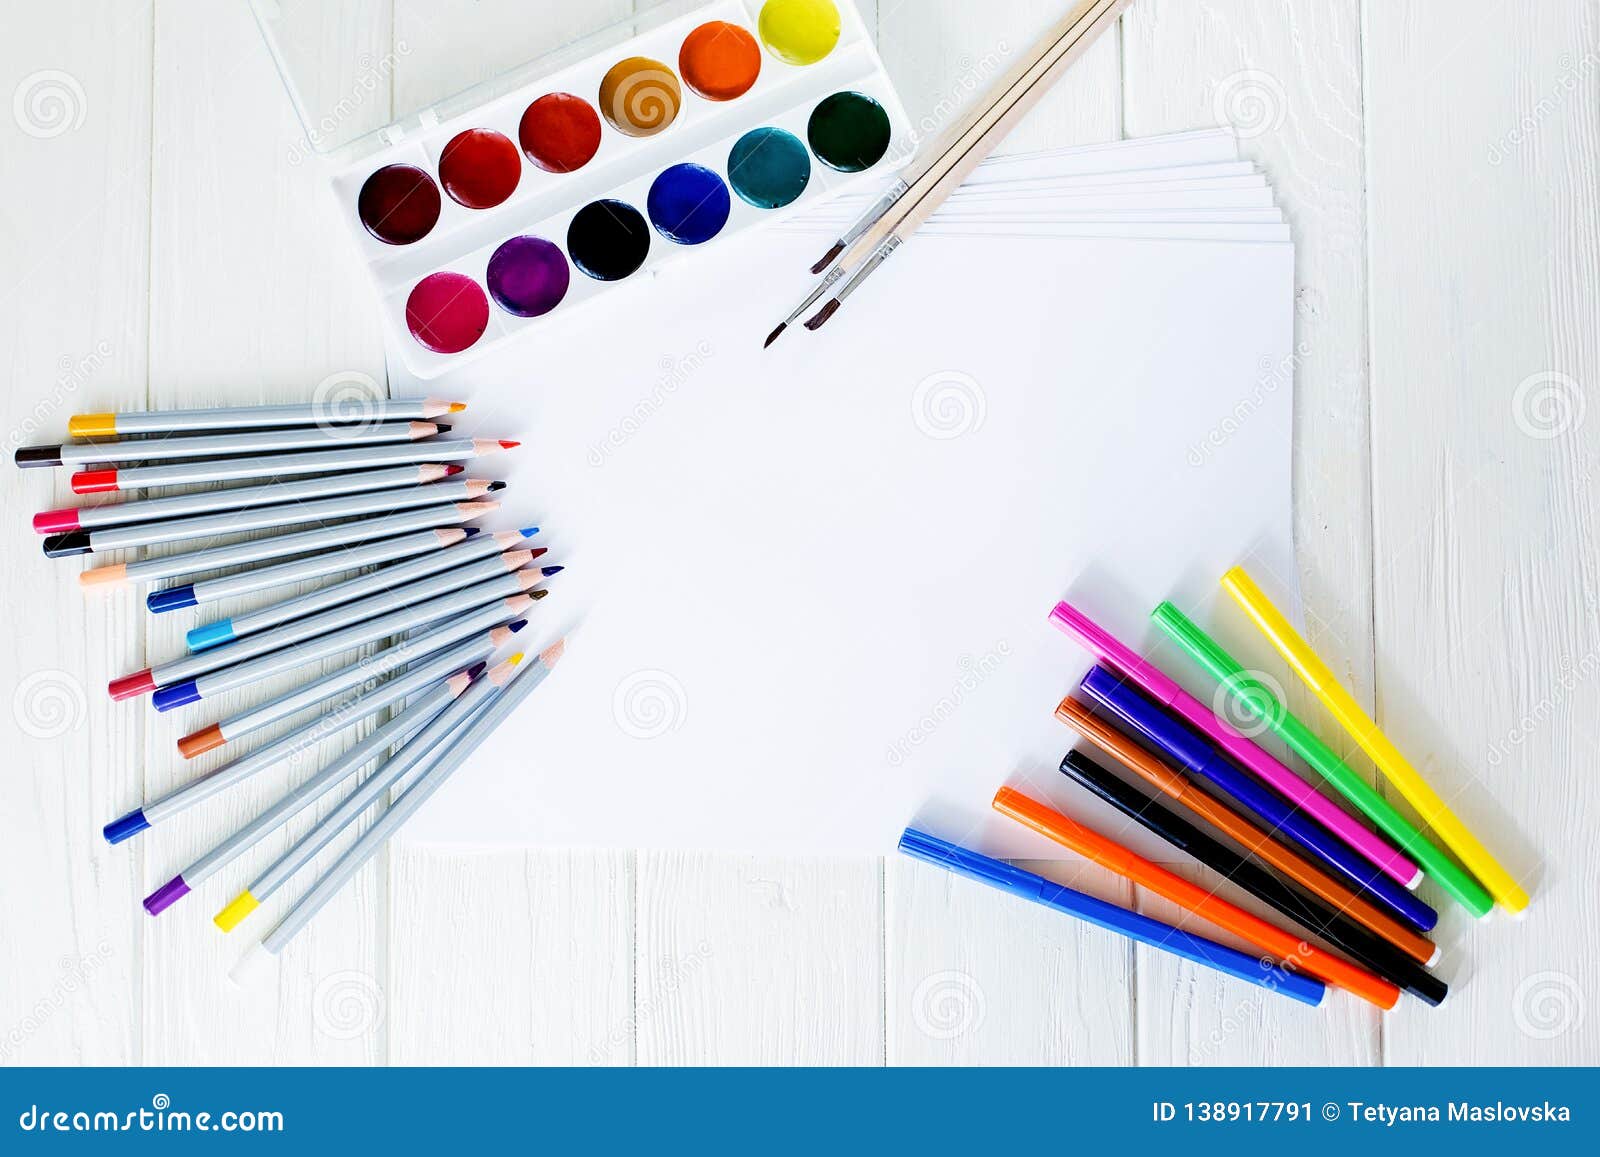 Kids Drawing On White Sheet Of Paper, Closeup Stock Photo, Picture and  Royalty Free Image. Image 49661651.